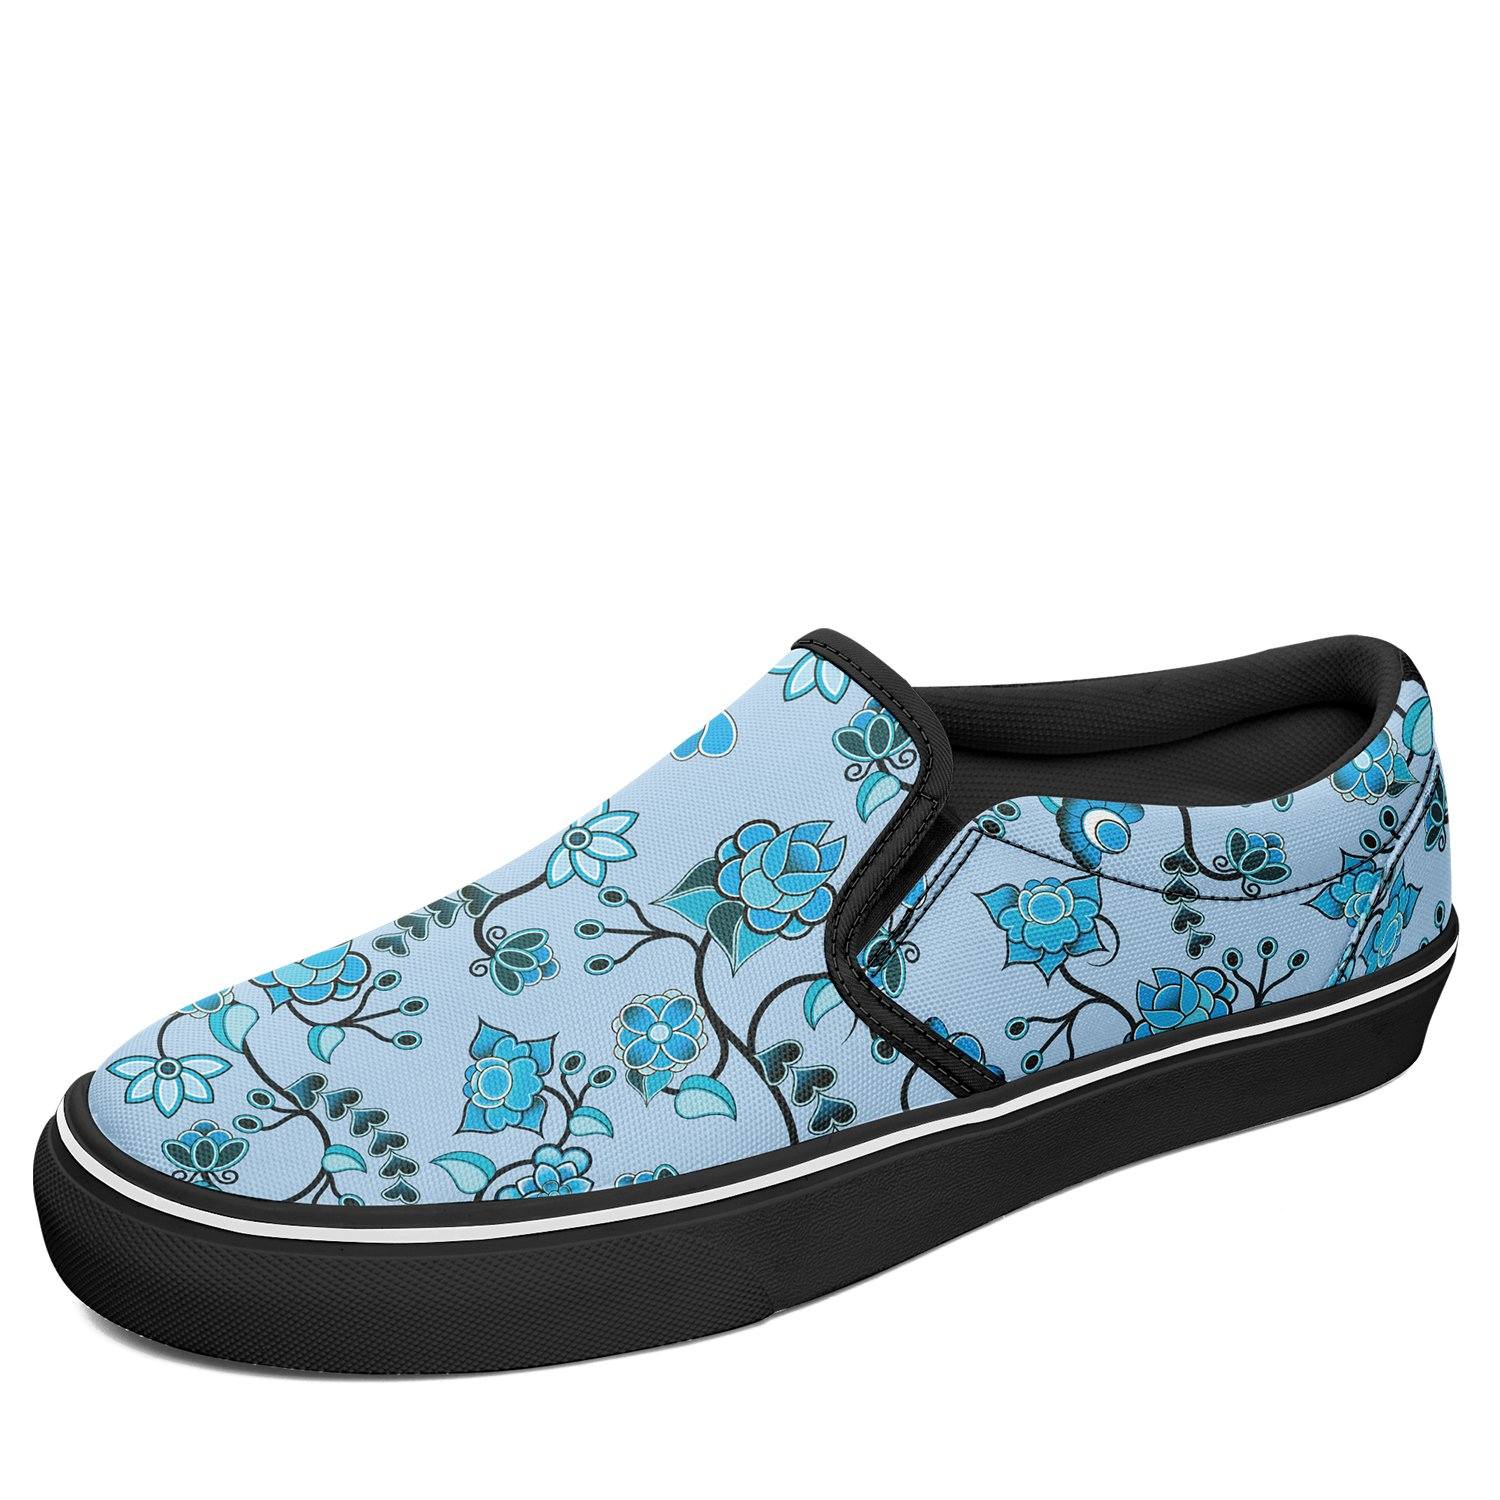 Blue Floral Amour Otoyimm Canvas Slip On Shoes otoyimm Herman US Youth 1 / EUR 32 Black Sole 